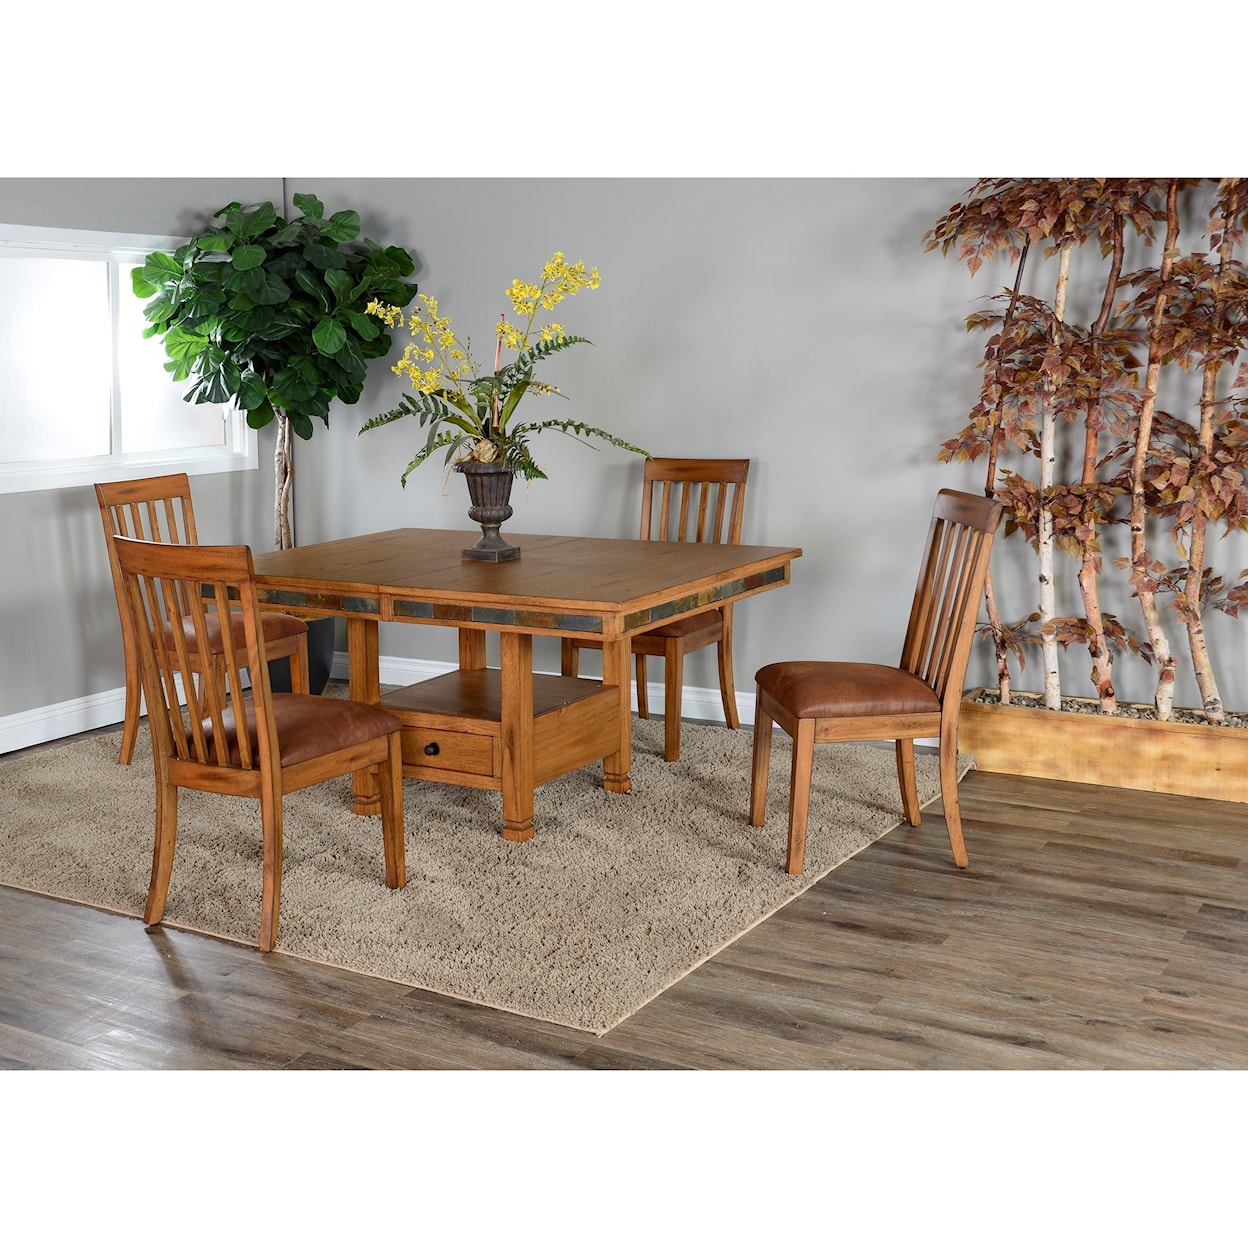 Sunny Designs Sedona Dining Table and Chair Set